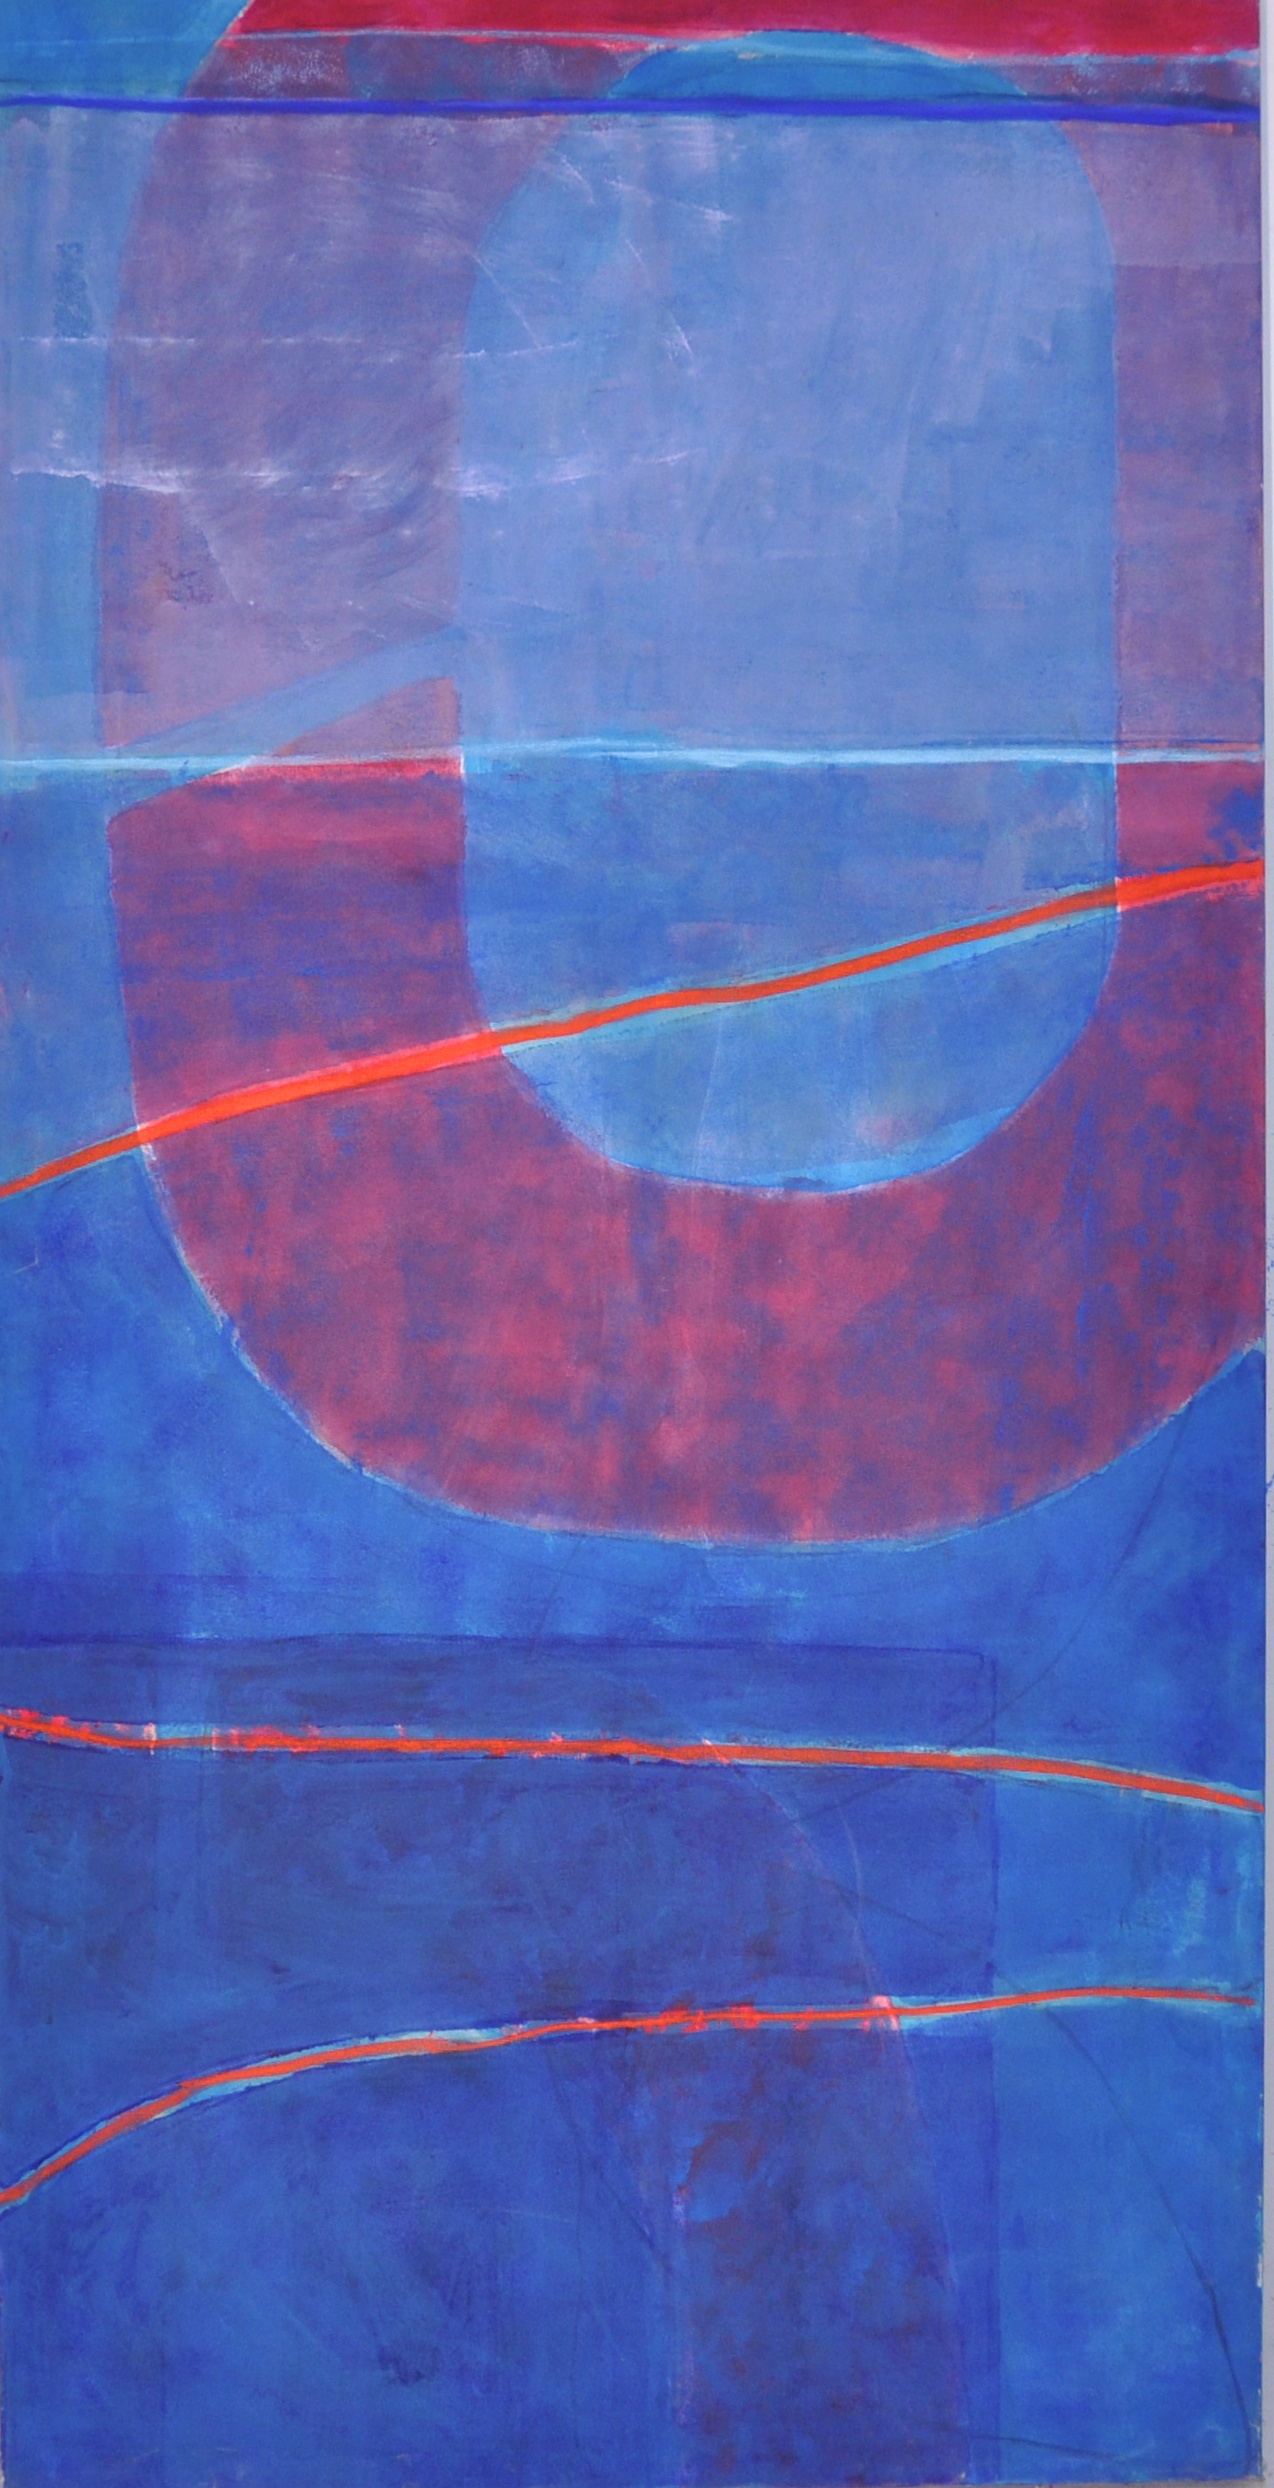 Taking a line for a walk 1 
Acrylic on canvas 
197 x 100 cm